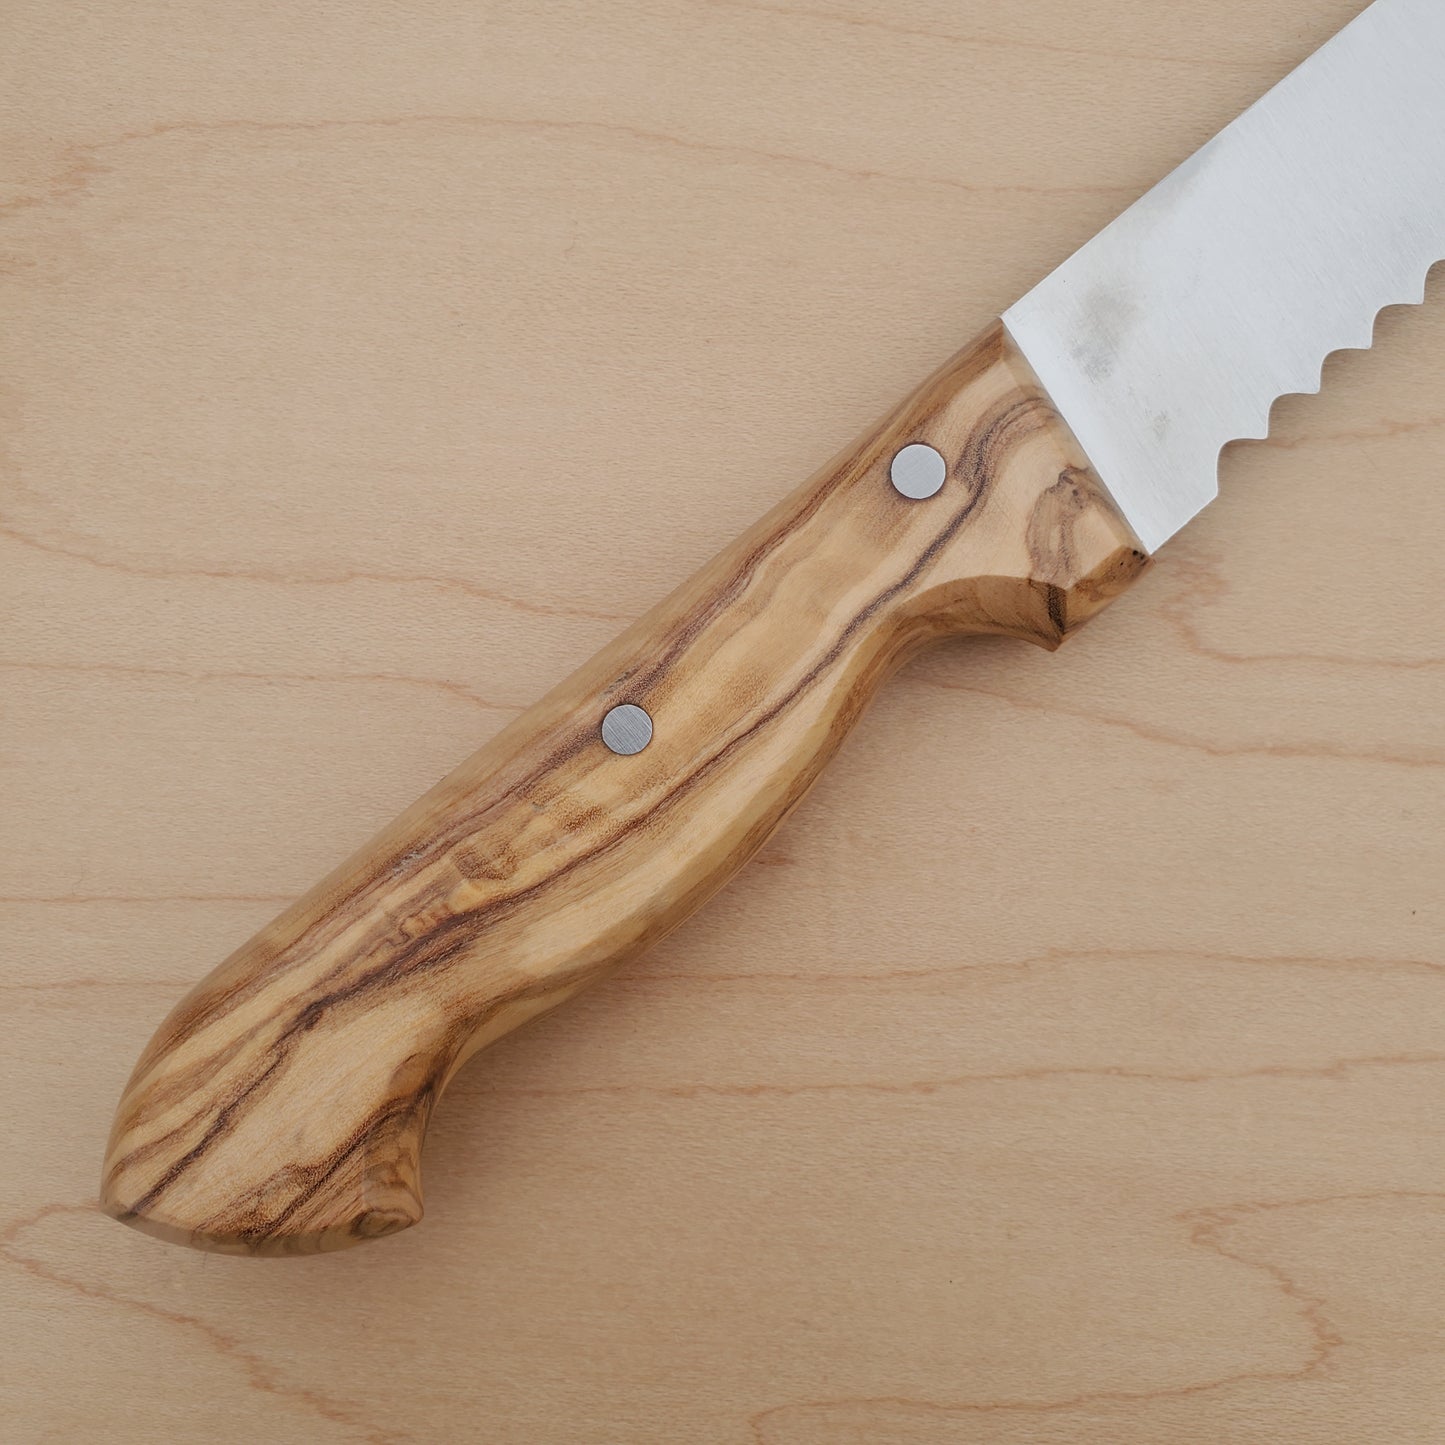 Pallares Bread Knife 10" - Olive